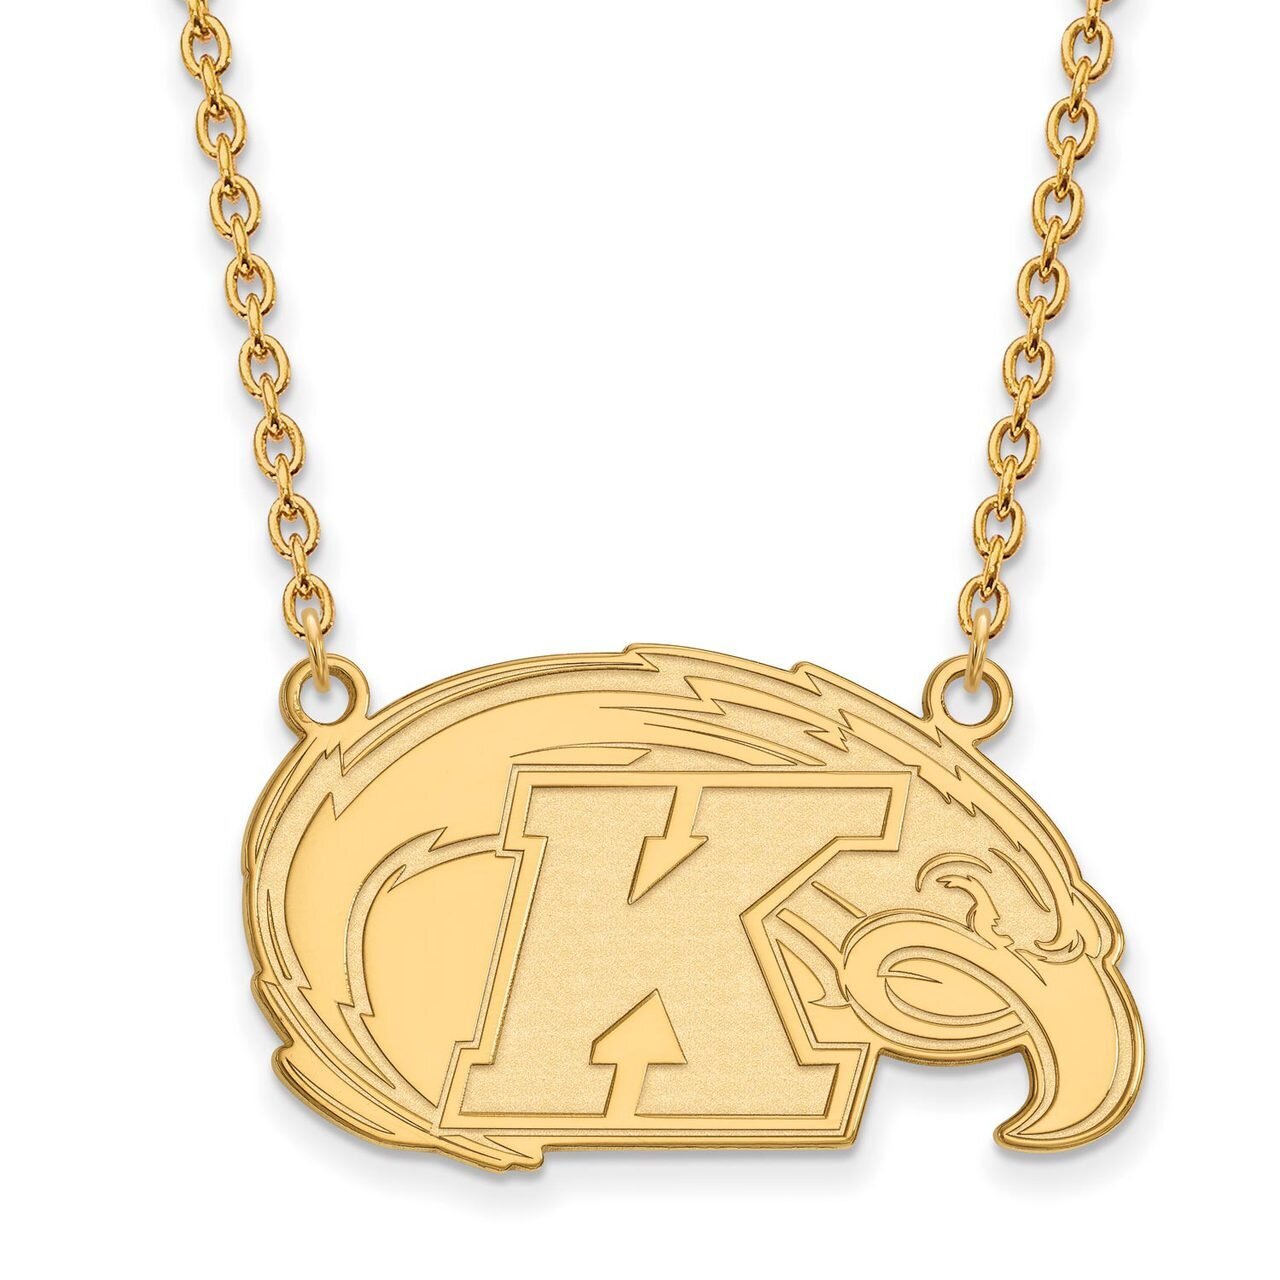 Kent State University Large Pendant with Chain Necklace 10k Yellow Gold 1Y009KEN-18